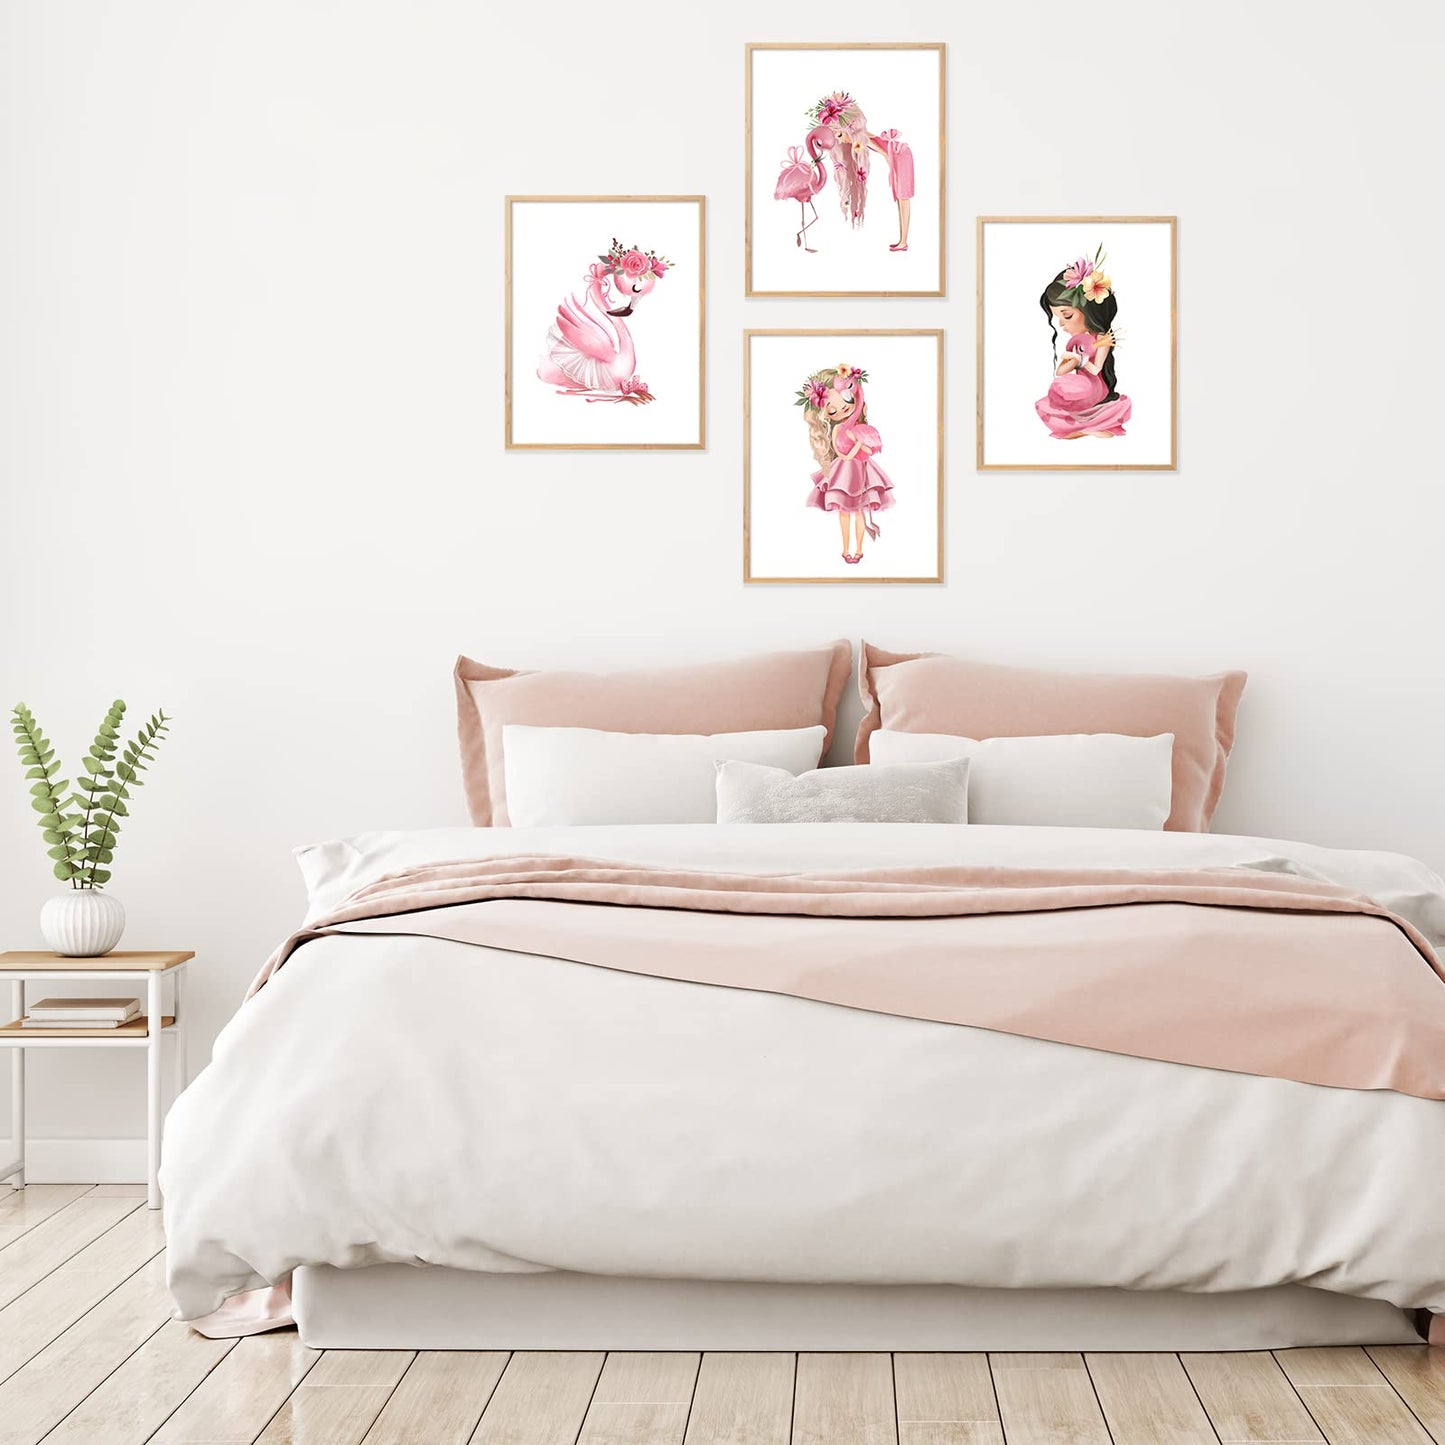 Flamingo Girl Wall Art Canvas Prints - Watercolor Pink Picture Princess Floral Animal Decor Poster for Baby Shower Bathroom Nursery Room Home Living Teen Bedroom Wall Decor Set of 4 Unframed 8x10inch